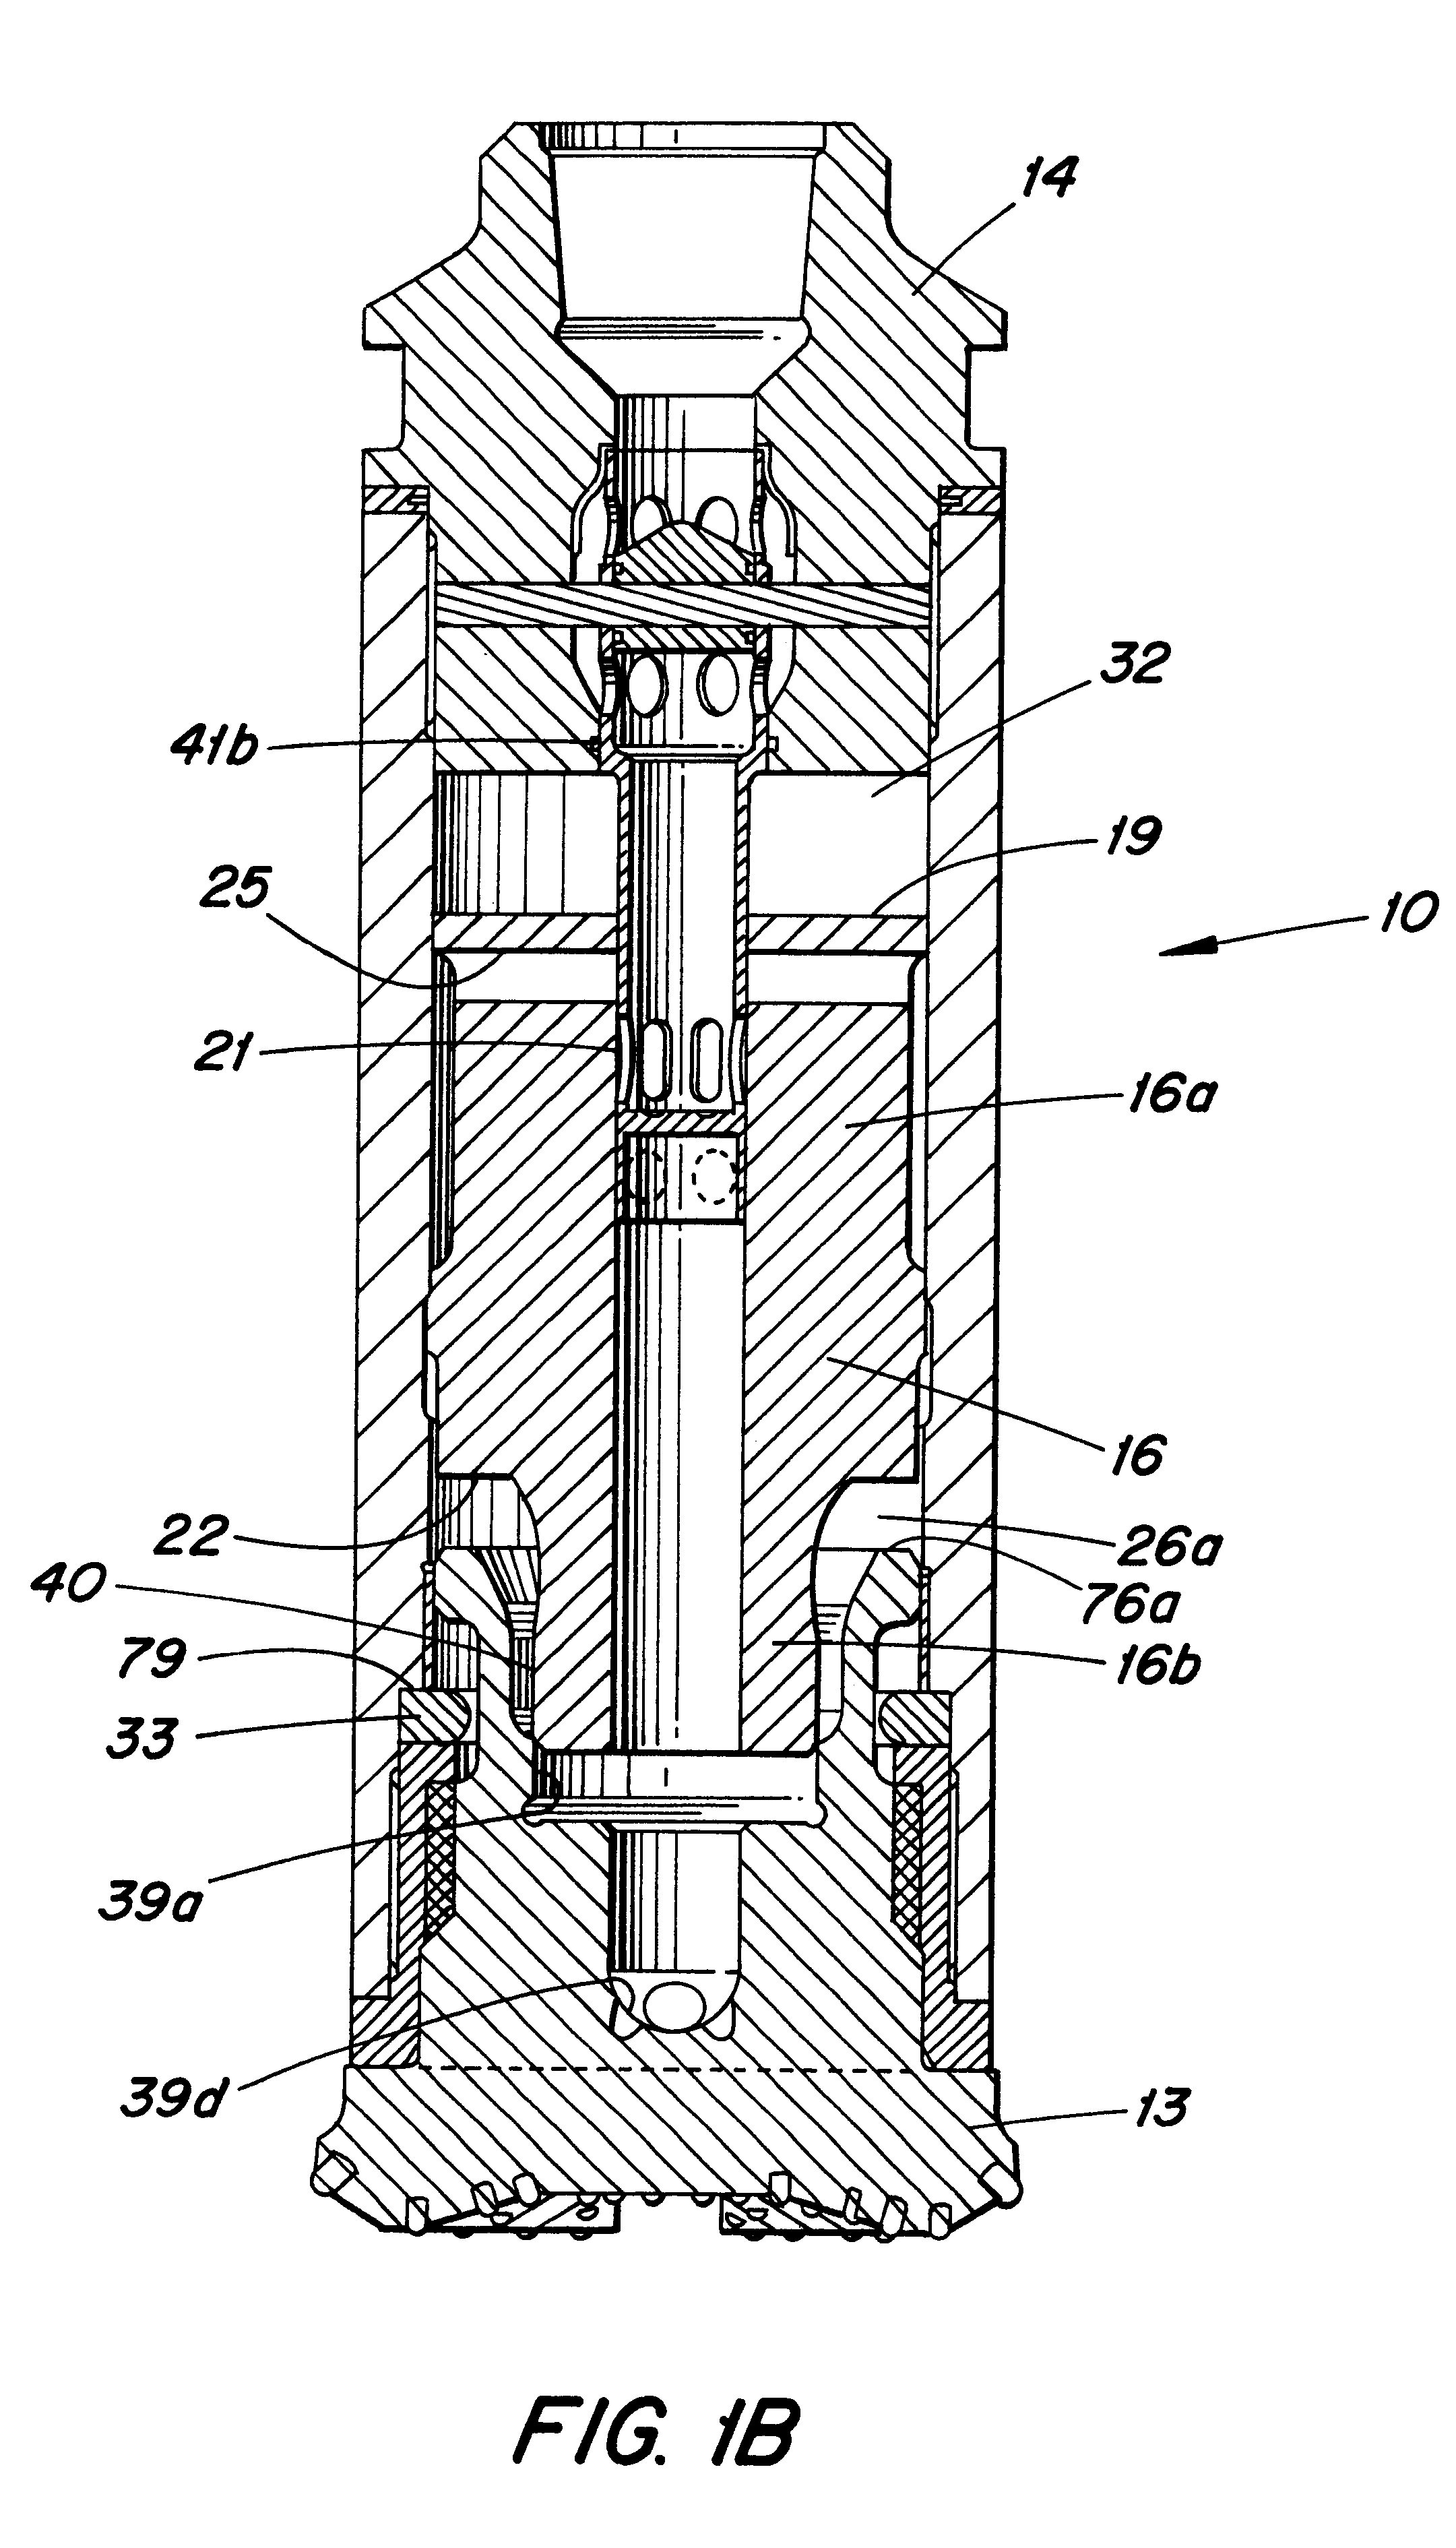 Percussive down-the-hole hammer for rock drilling, and a drill bit used therein